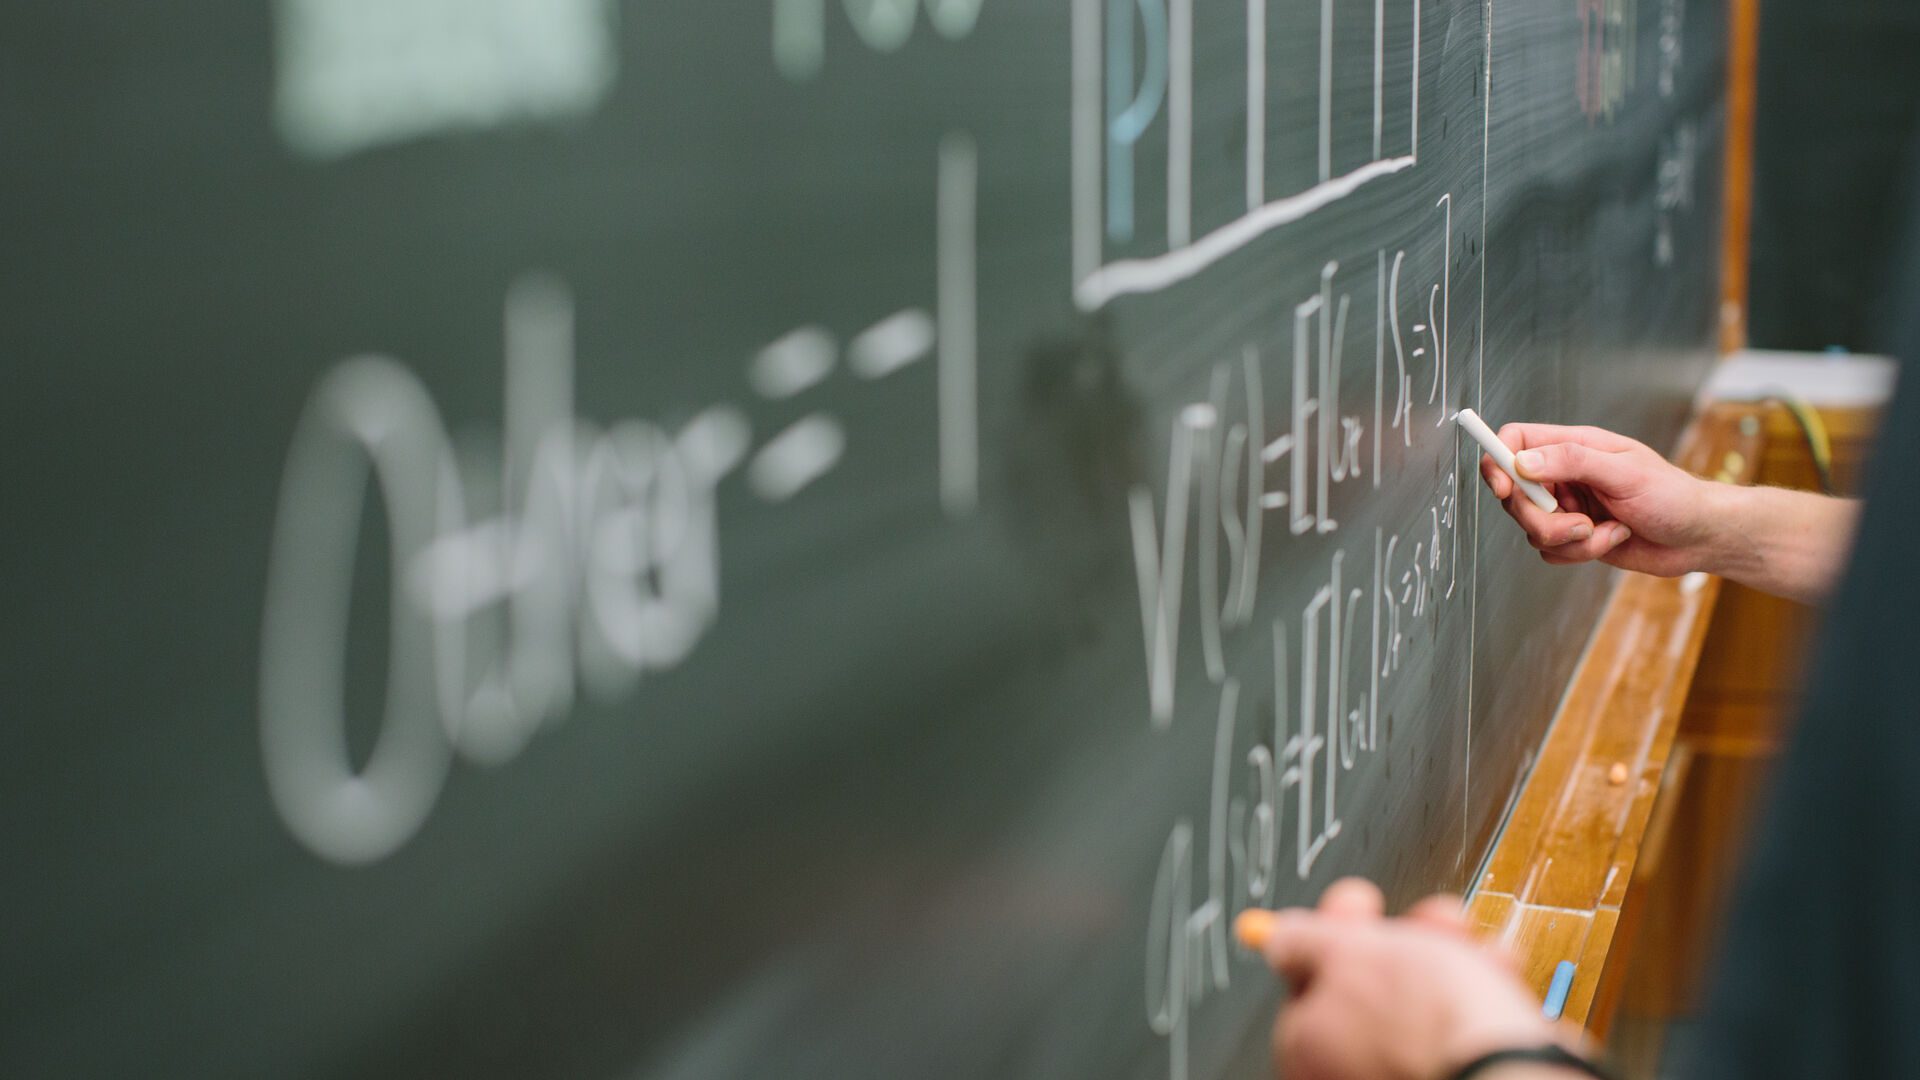 hands holding chalk and writing an equation on chalkboard